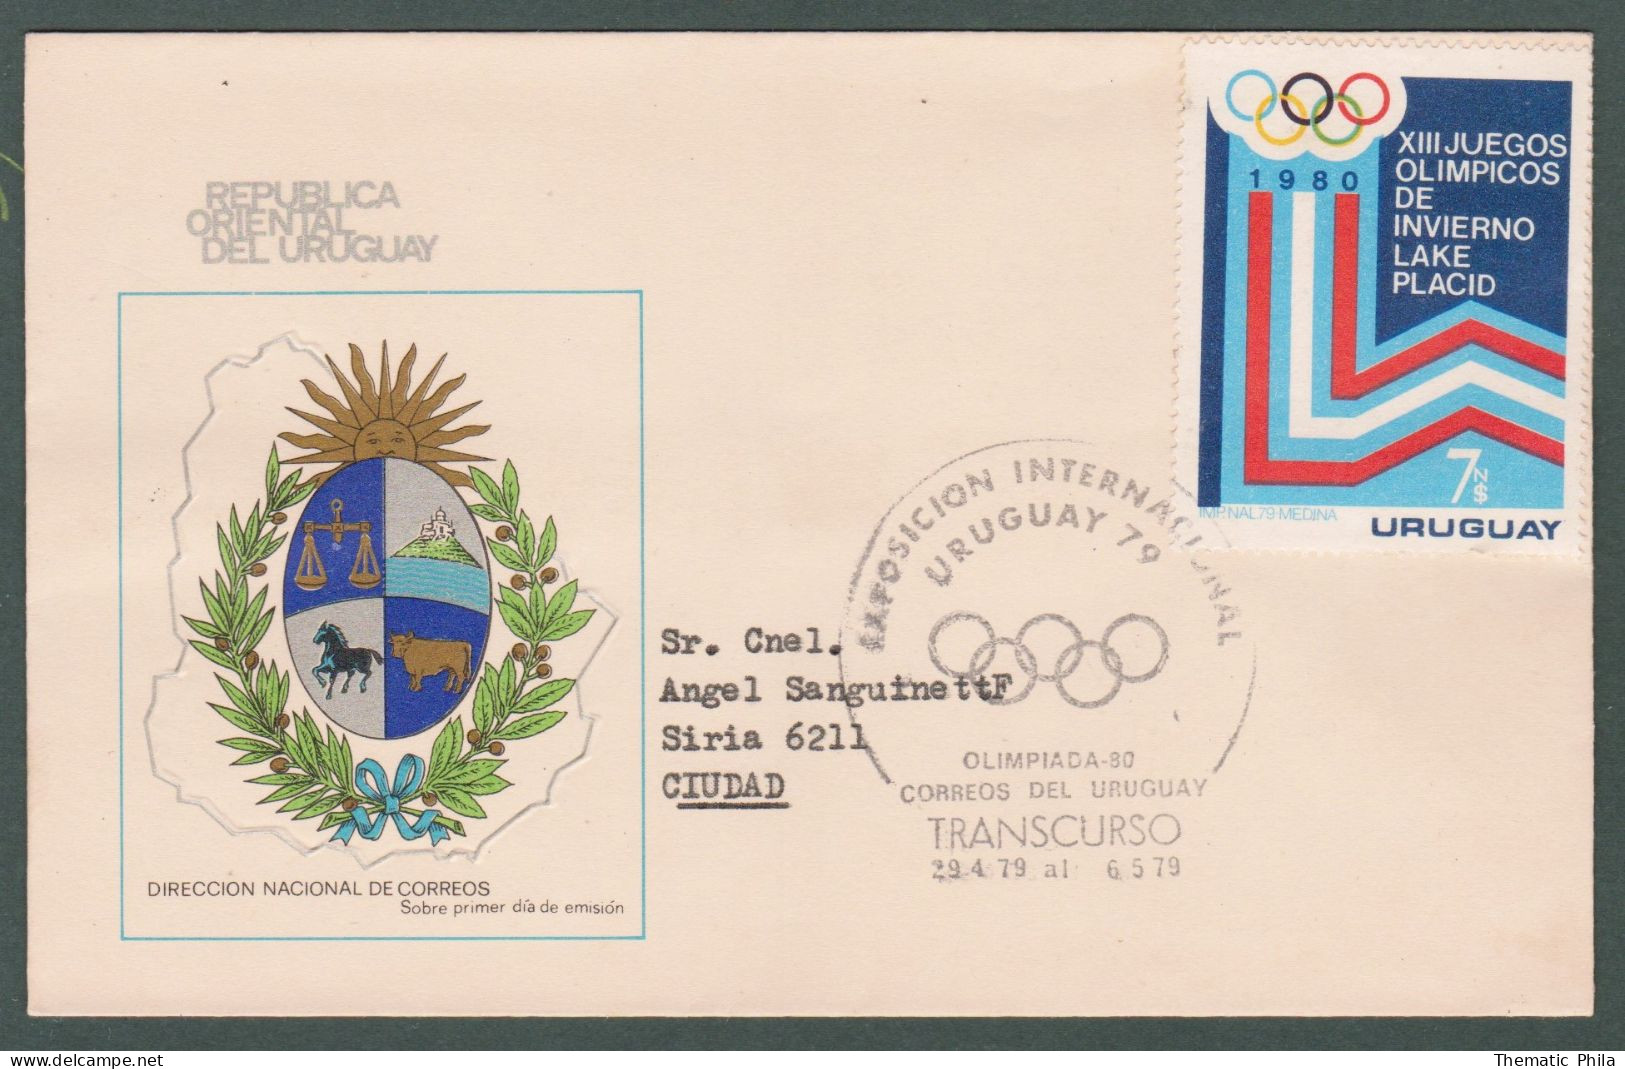 1979 URUGUAY Special Postmark Transcurso Expo International Olympic Games -Comité International Olympique - Inverno1980: Lake Placid